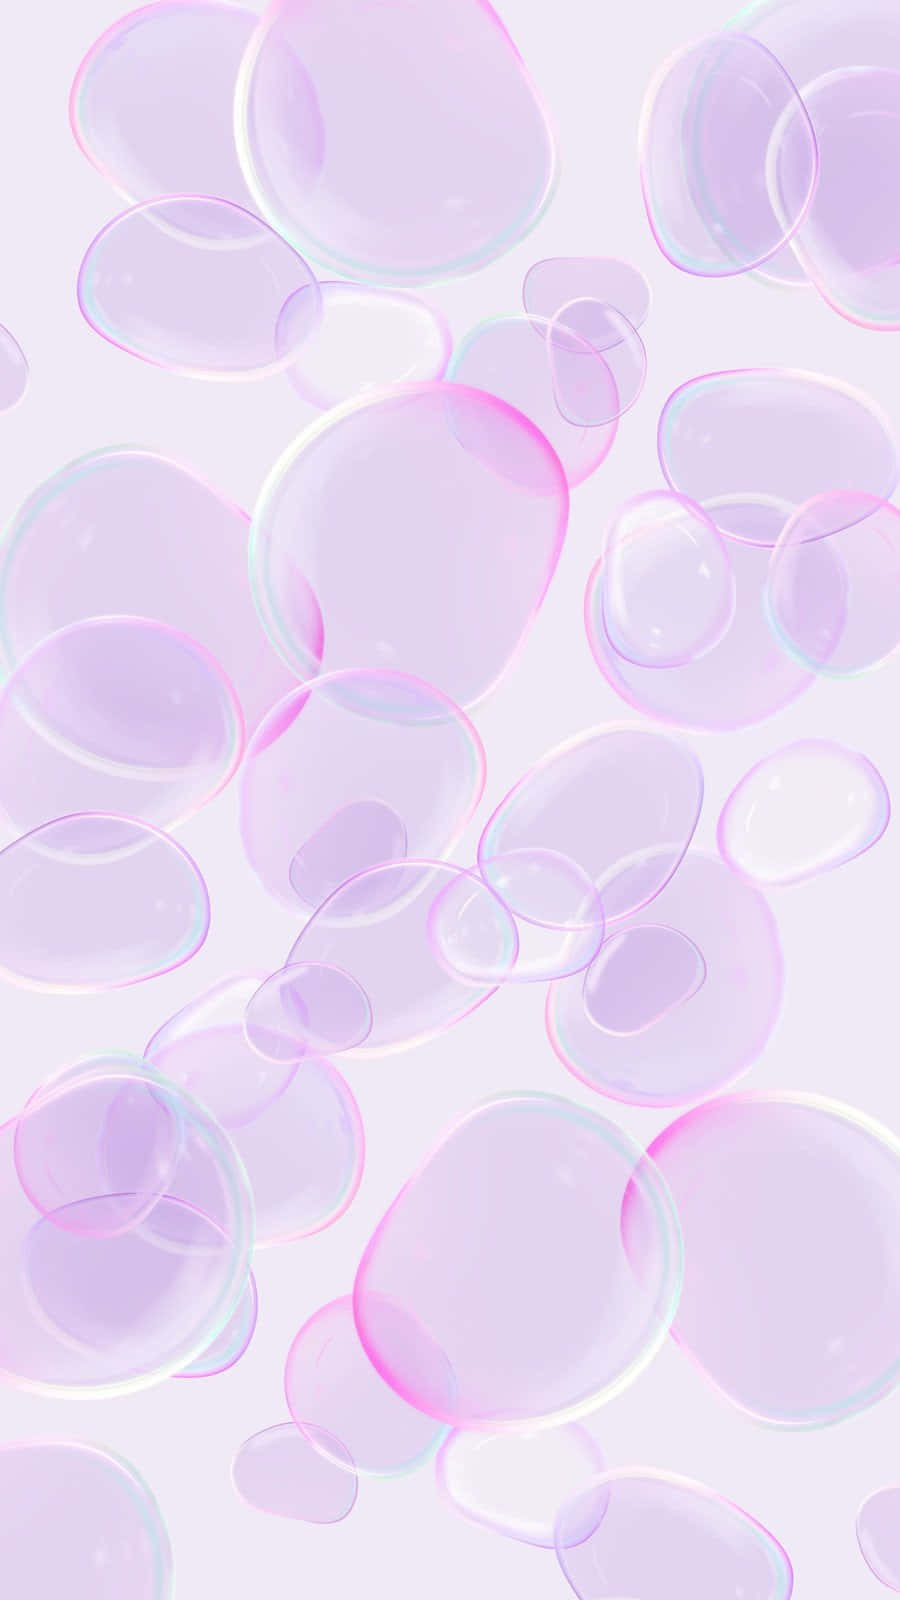 A Pink And White Background With Soap Bubbles Wallpaper